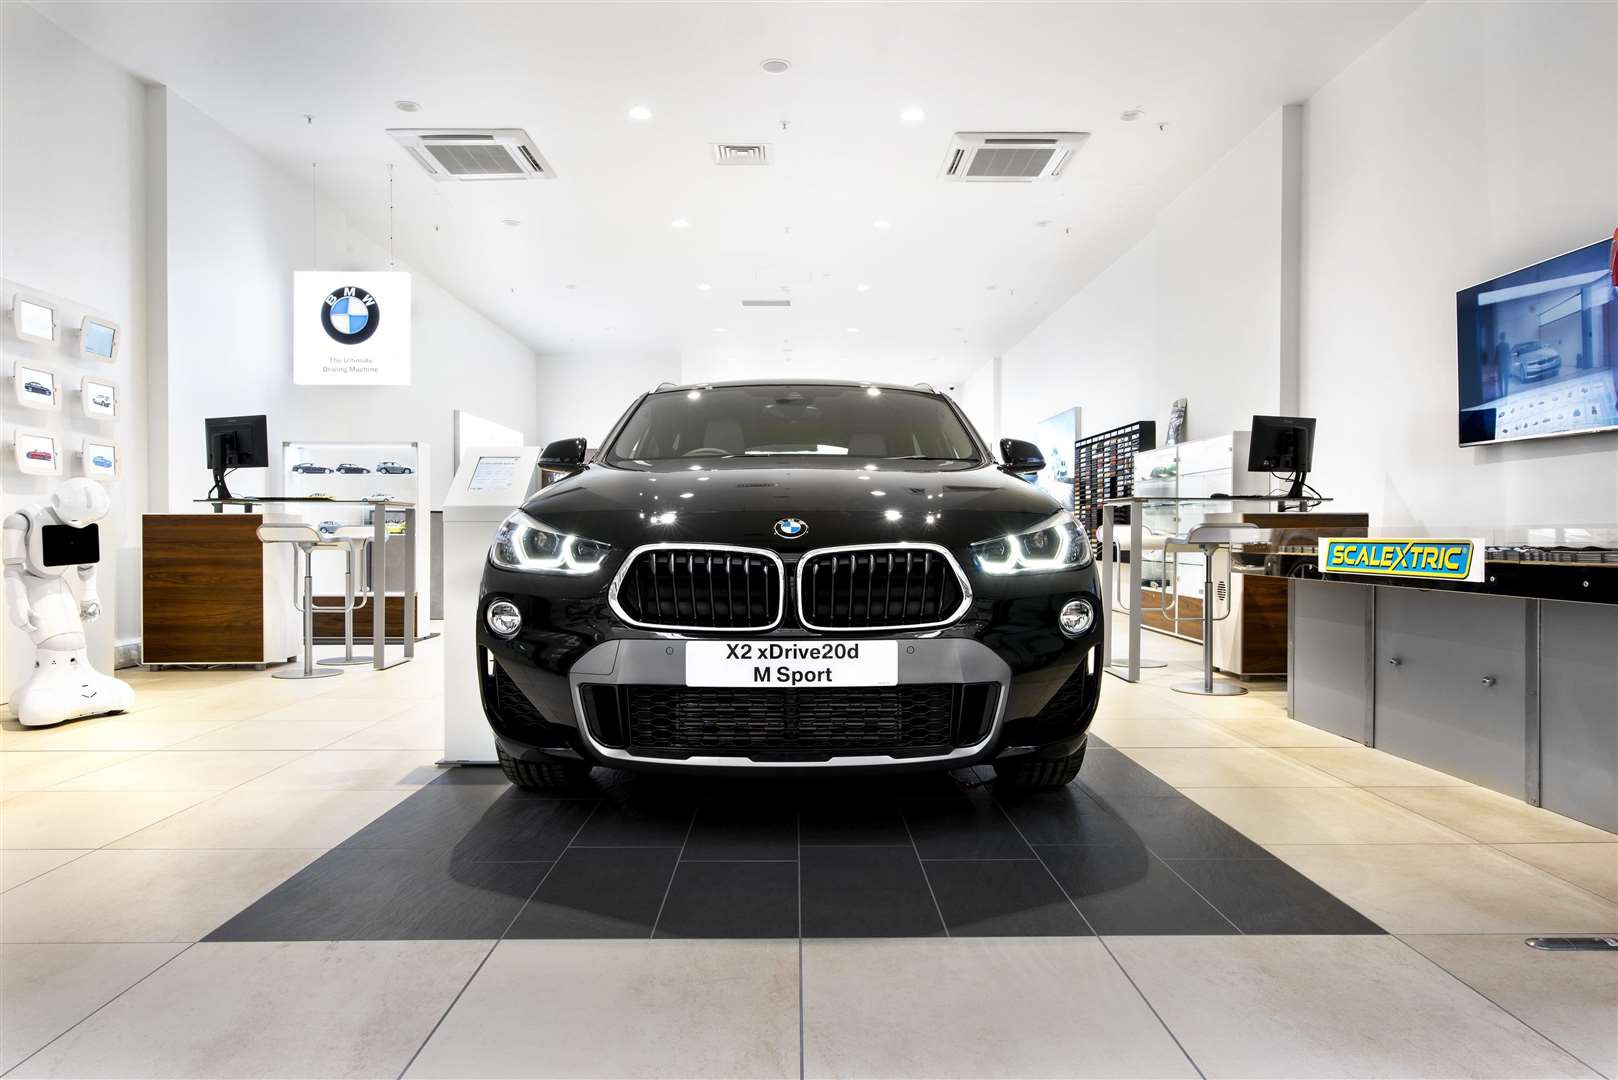 BMW Urban store at Bluewater (1701988)